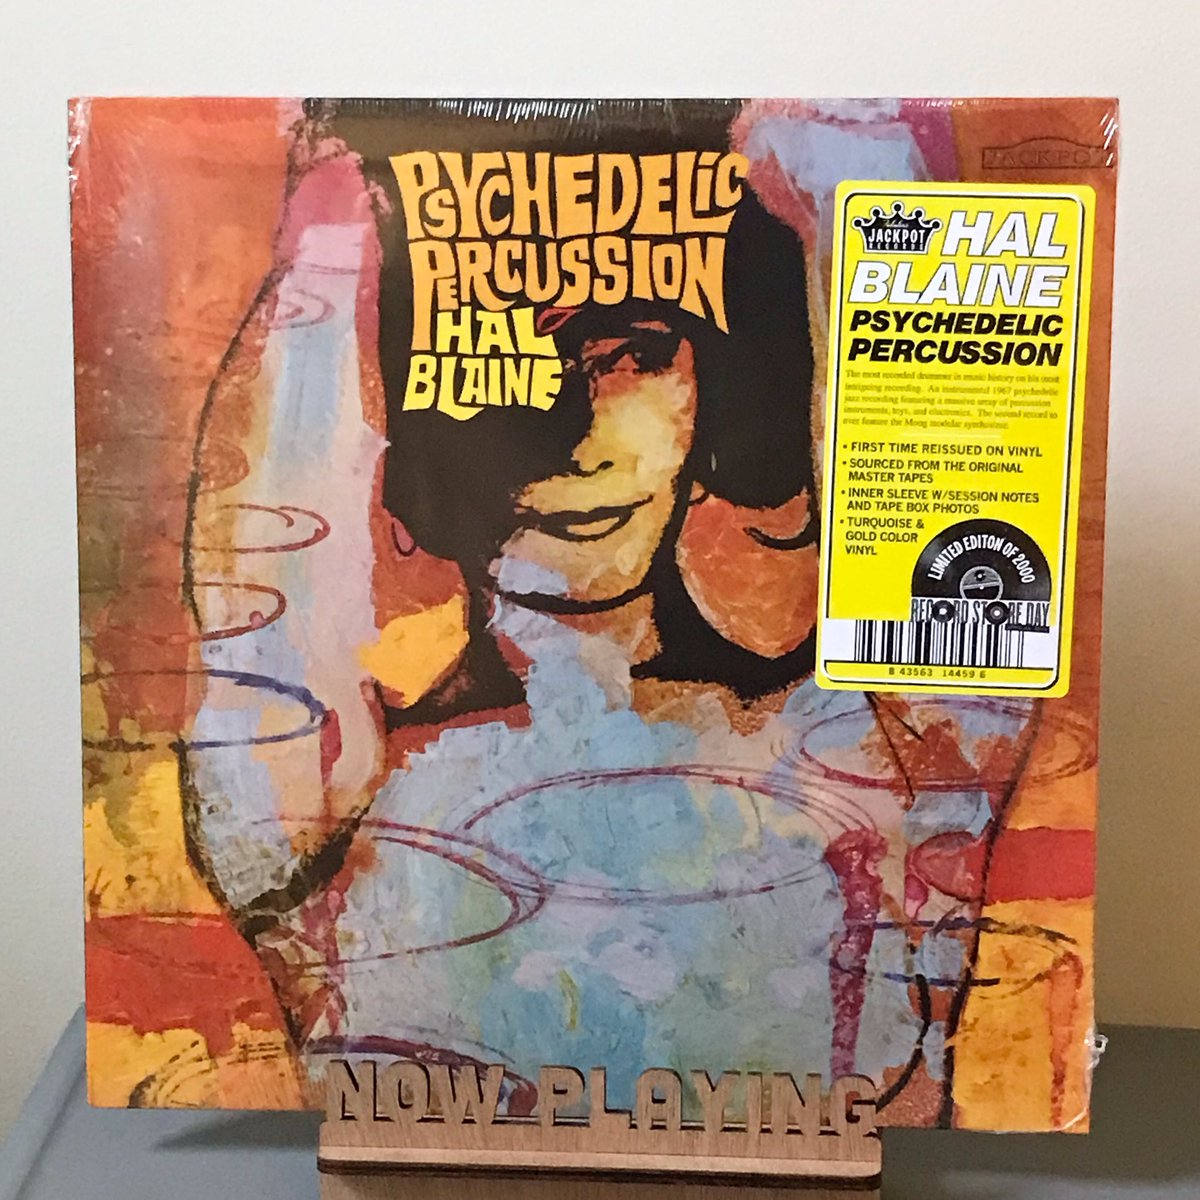 Now Playing: Hal Blaine “Psychedelic Percussion” (1967; 2023 #RSD release).

#vinyl #vinylrecords #vinylcollection #vinylcollector #vinylcommunity #vinyladdict #halblaine #psychedelicjazz #percussion #synthesizer #recordstoreday